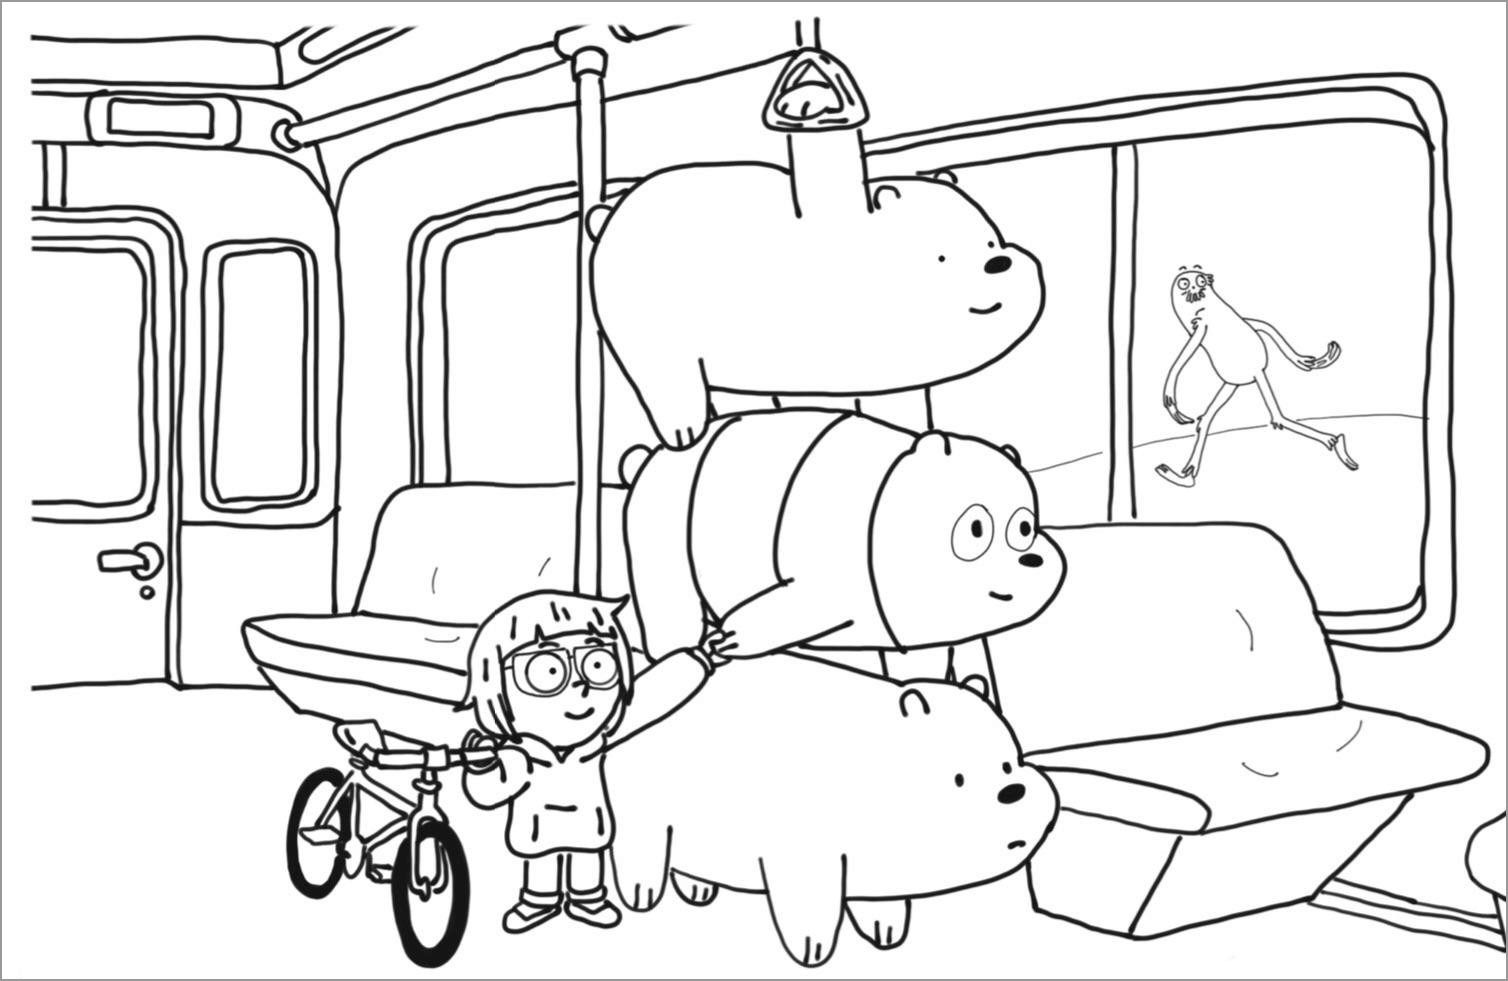 We Bare Bears In the Train Coloring Page